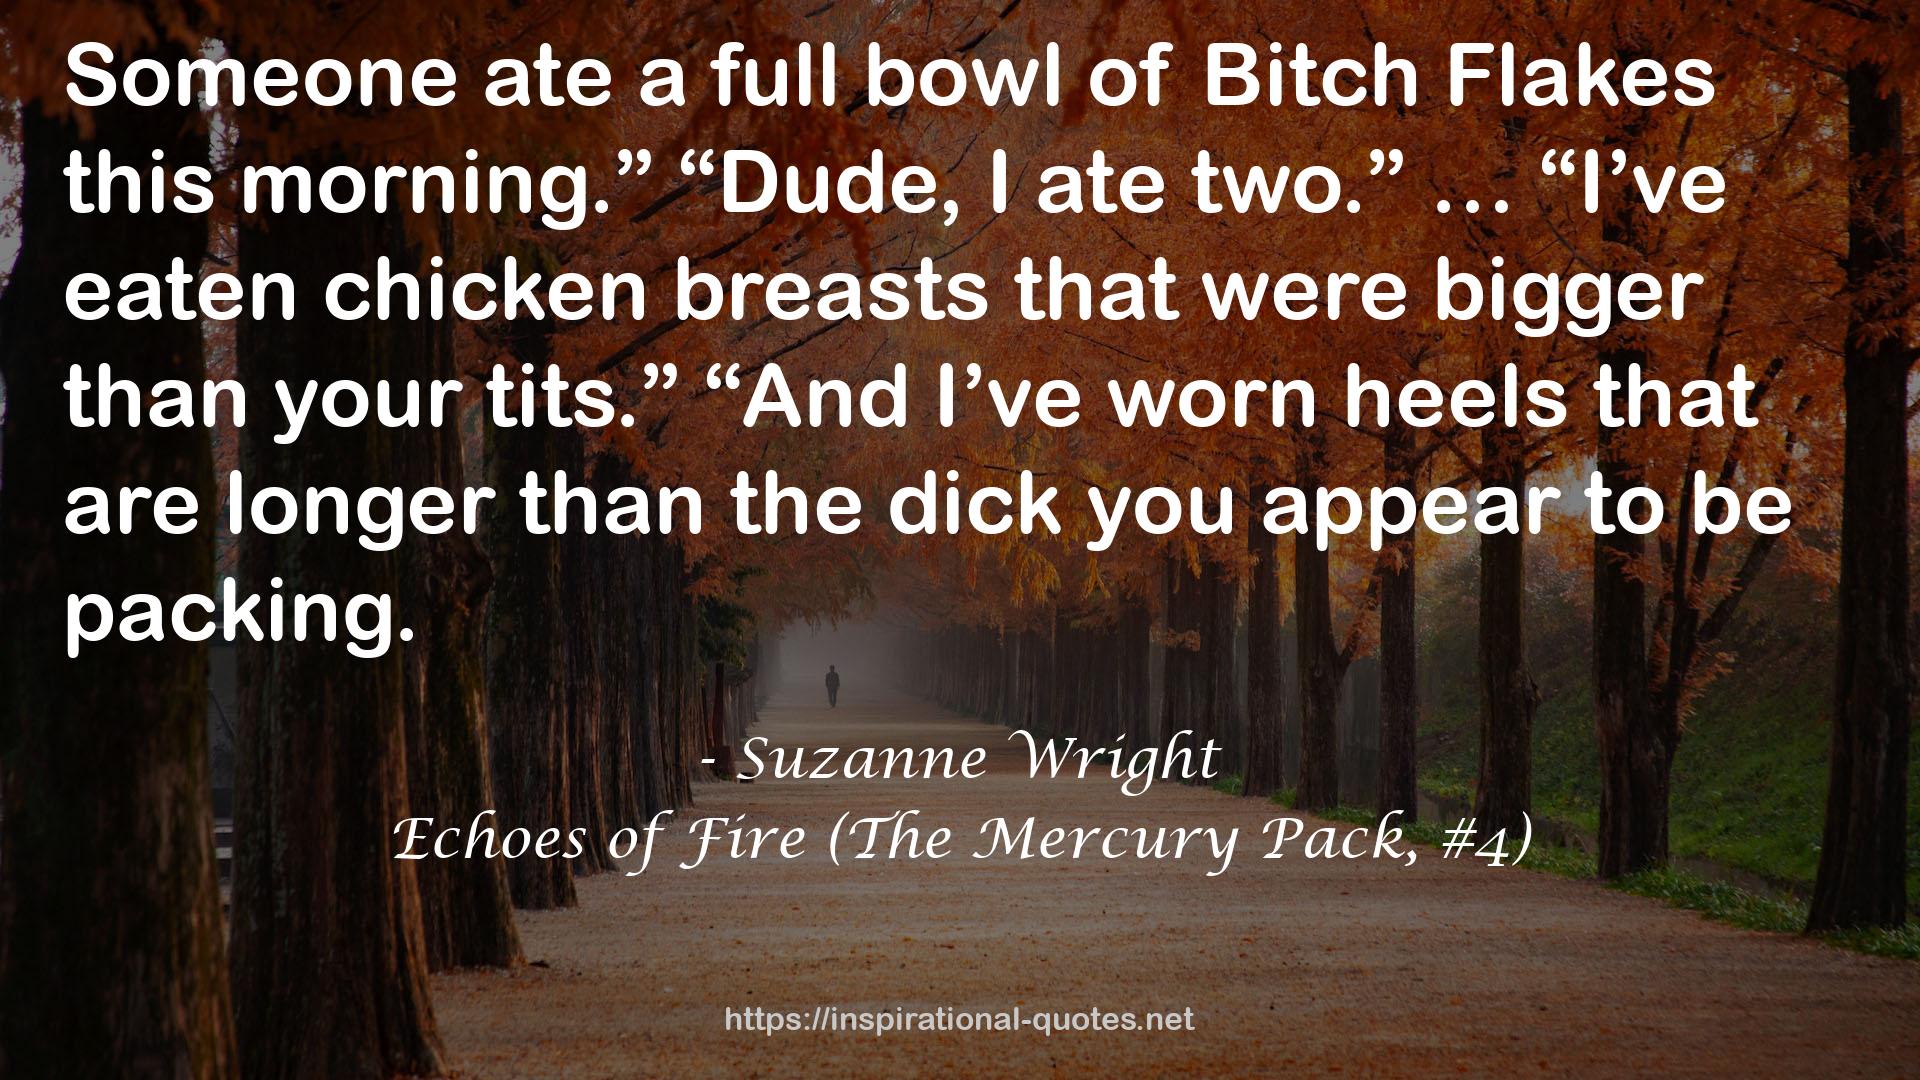 Echoes of Fire (The Mercury Pack, #4) QUOTES